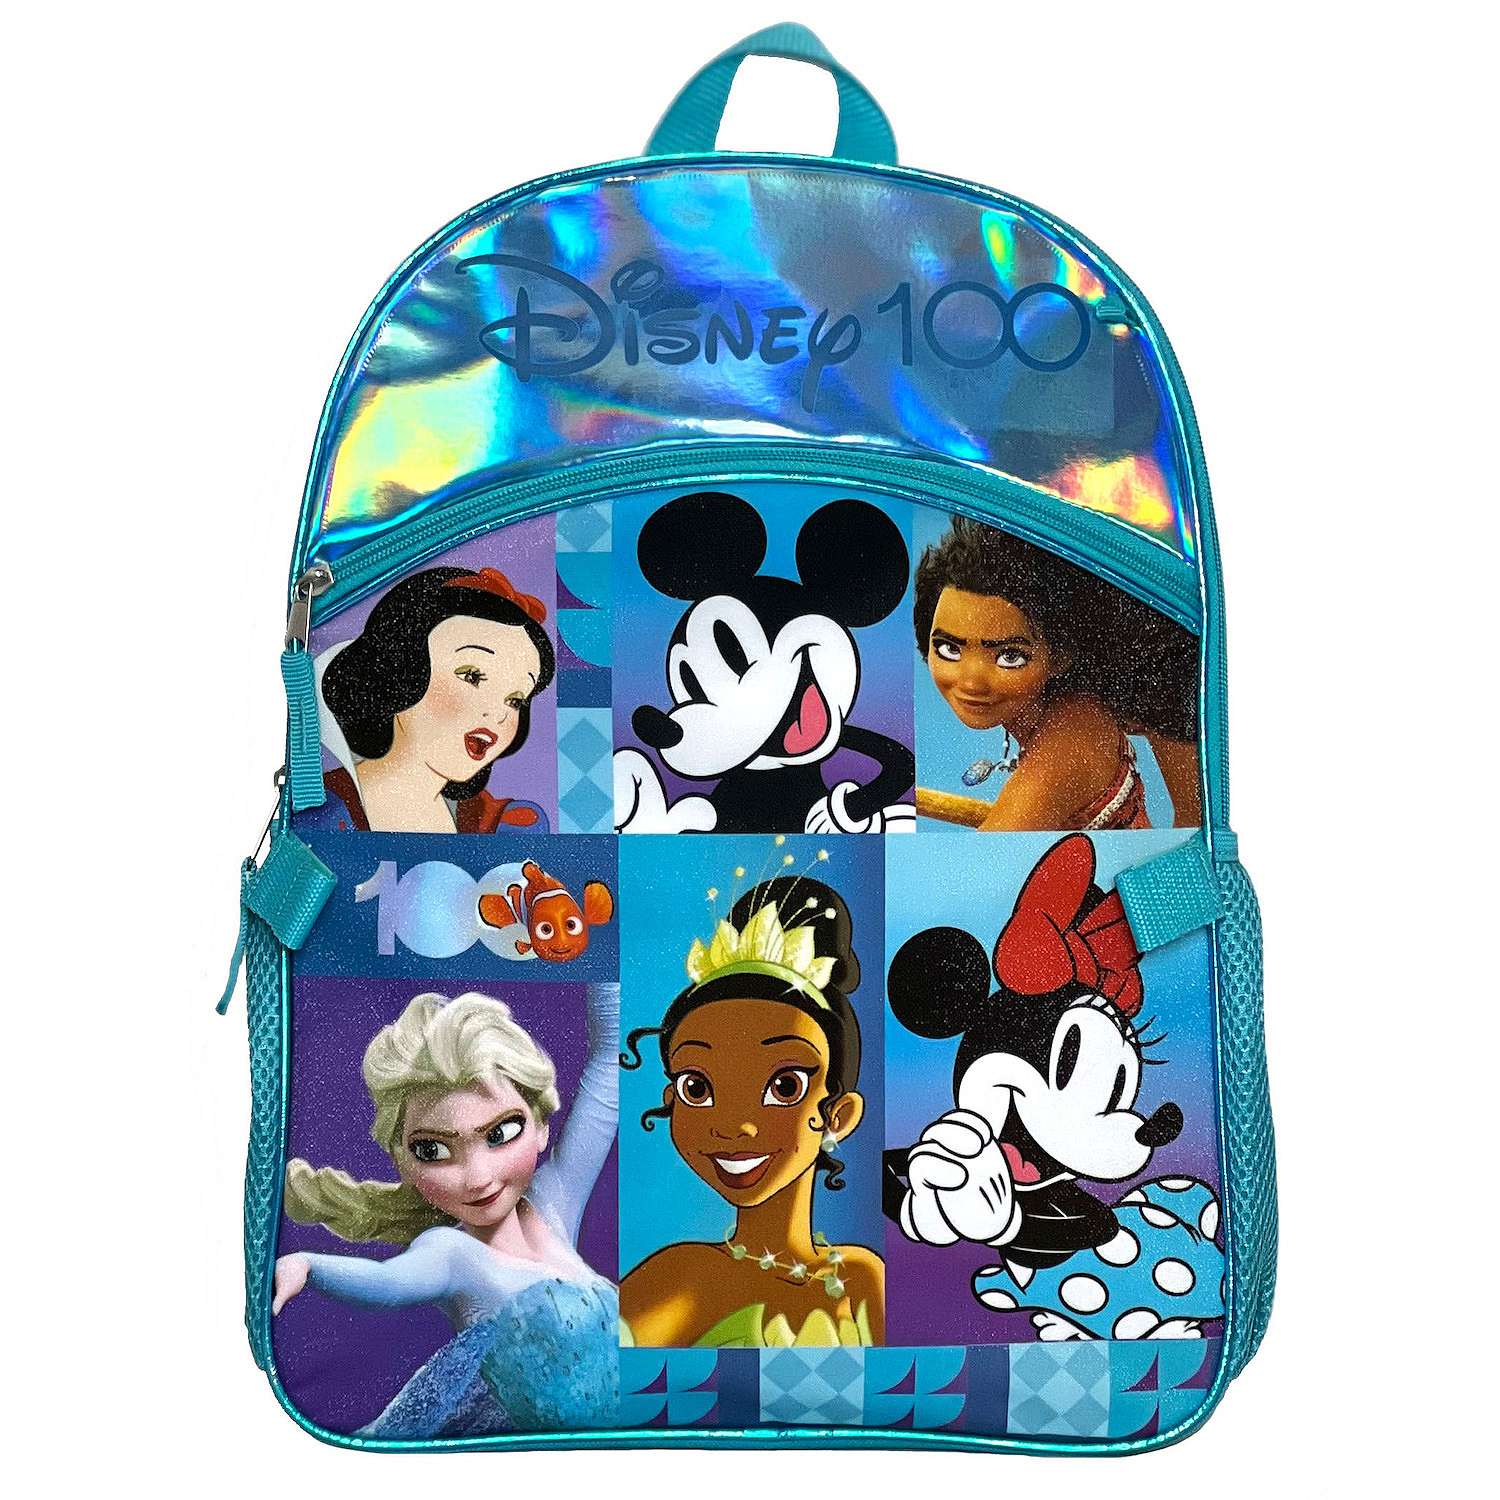 5-Piece Character Backpack Sets: (Minecraft, Disney, Batman, Encanto etc.) $7.64 & More + Free Store Pick Up at Kohl's or F/S on $49+